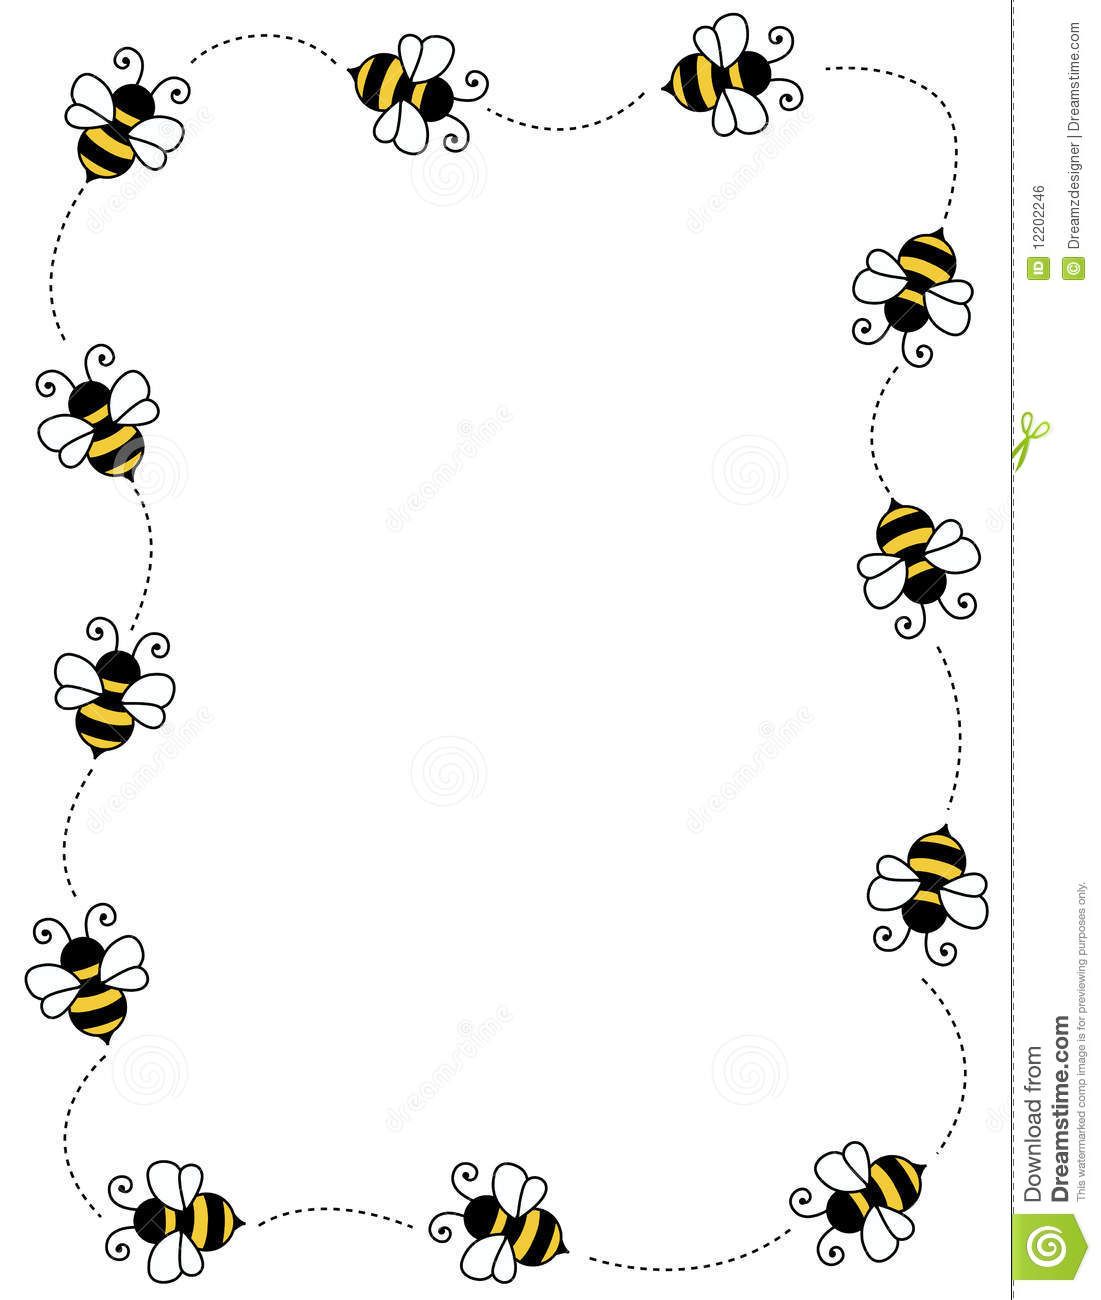 Bees clipart boarder.